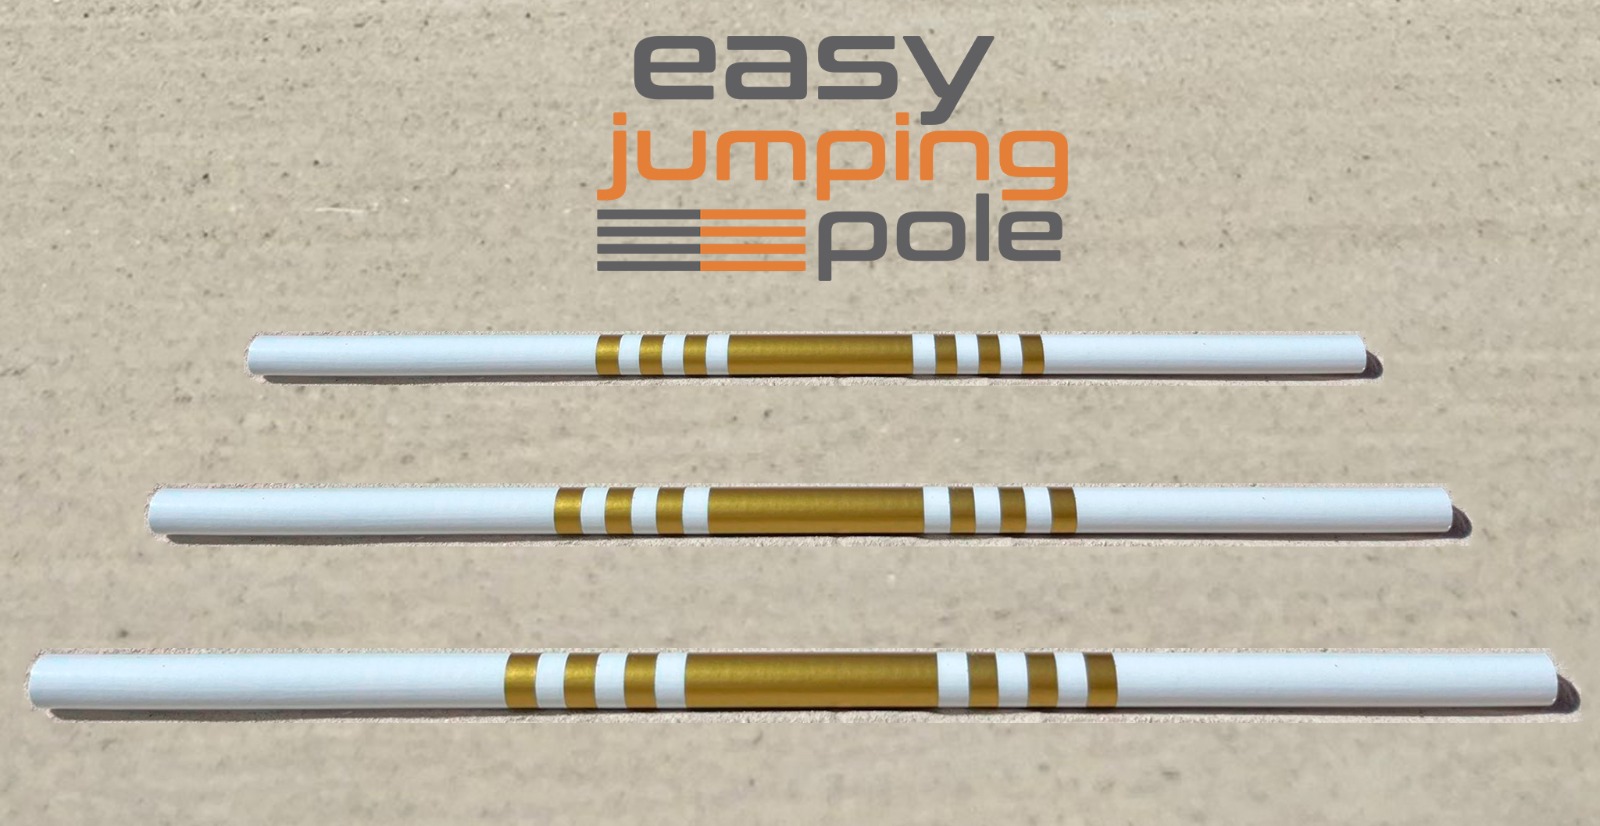 Easy jumping pole Model F-1